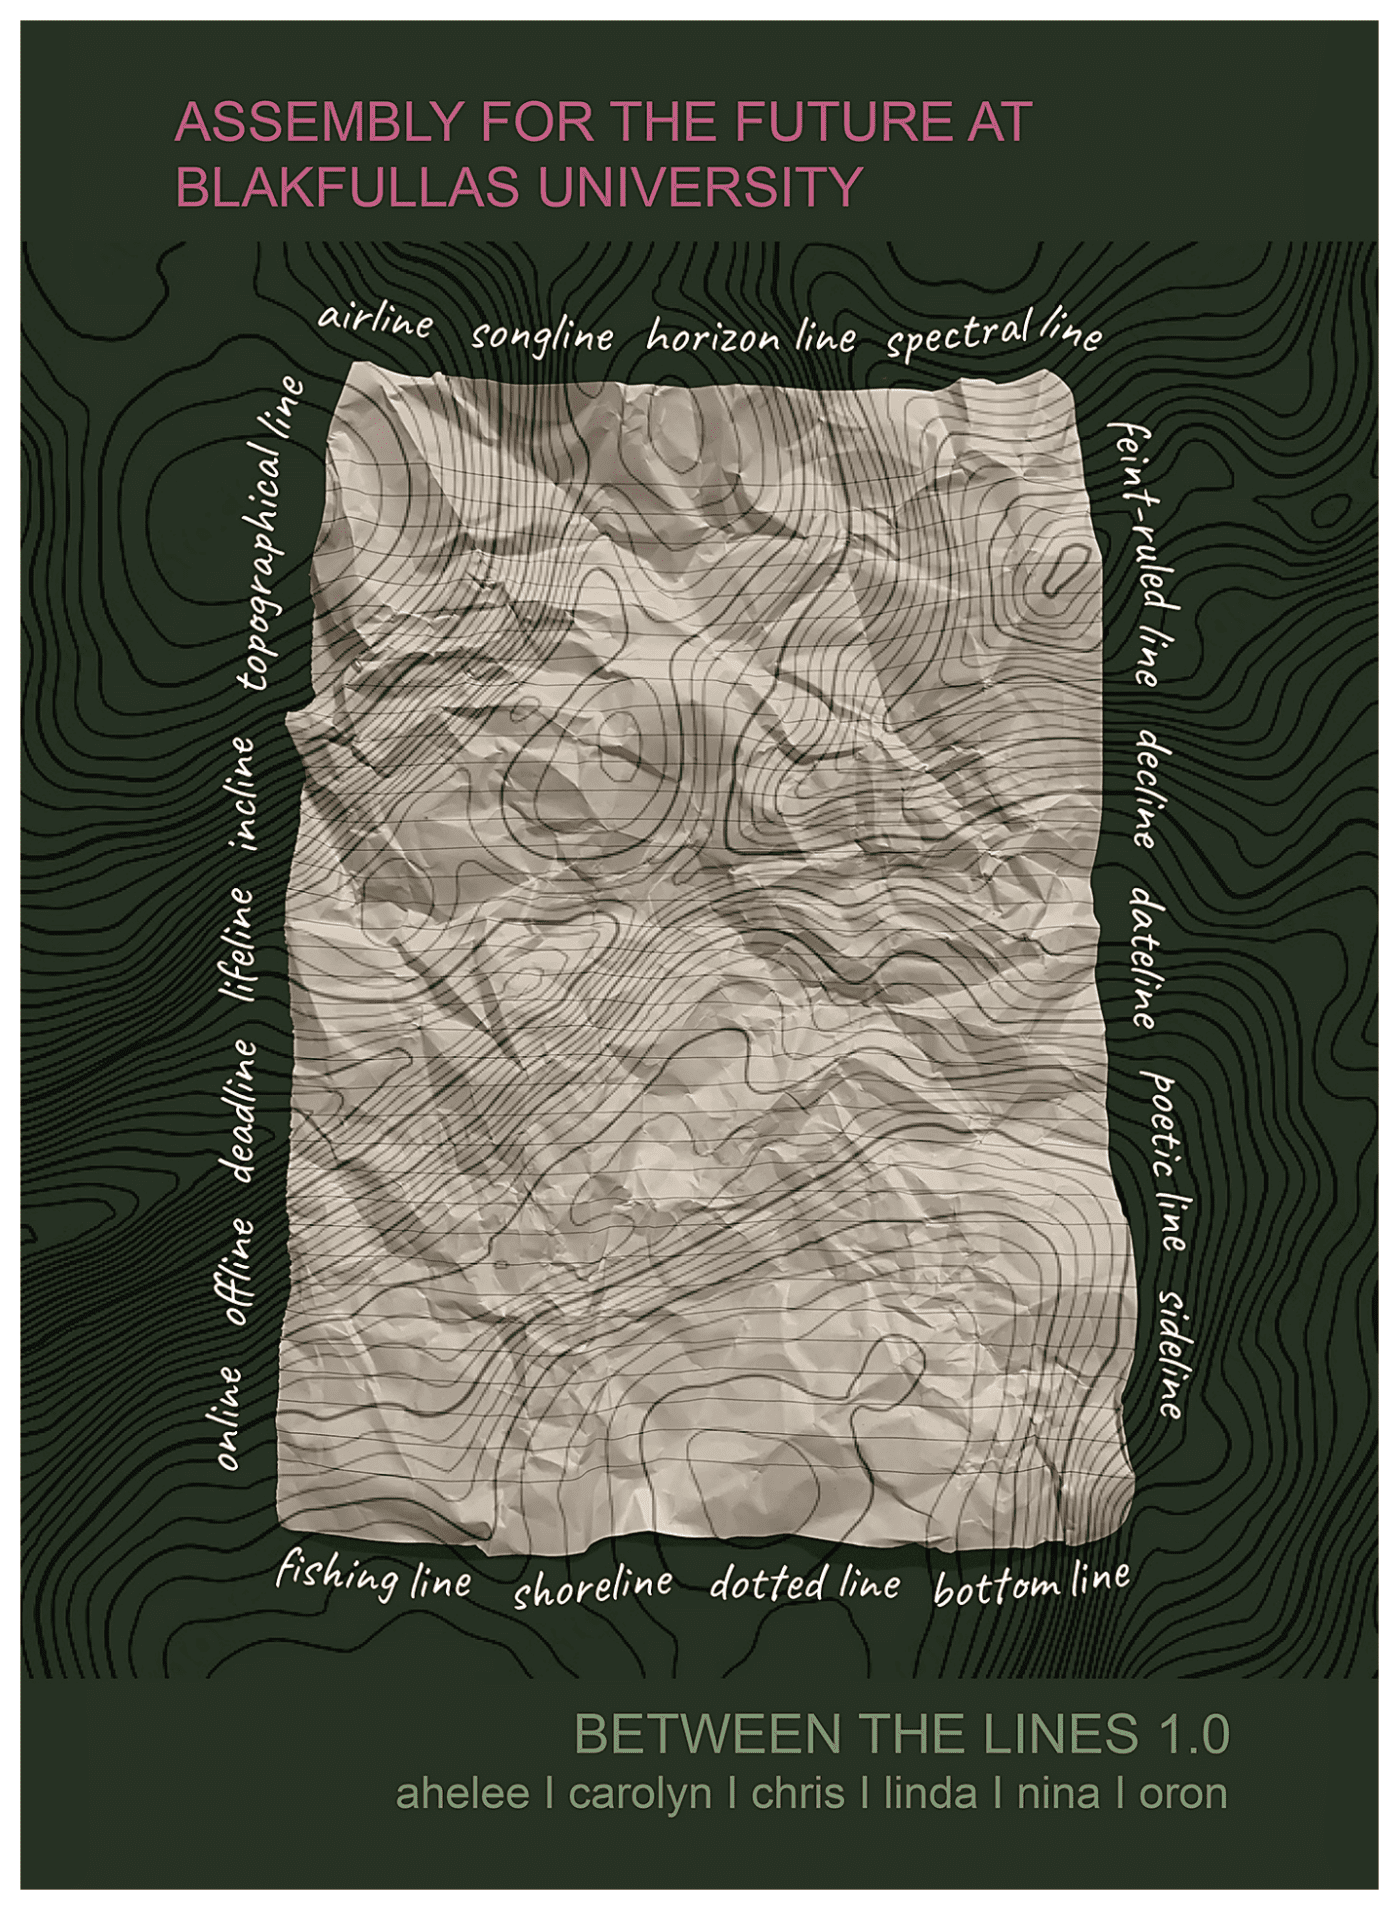 A crumpled page from a writing pad lies open, lined but without text. Contour lines from a topographic map are superimposed across it. Words create a border around the page. They read: airline, songline, horizon line, spectral line, feint-ruled line, decline, dateline, poetic line, sideline, bottom line, dotted line, shoreline, fishing line, online, offline, deadline, lifeline, incline, topographical line.